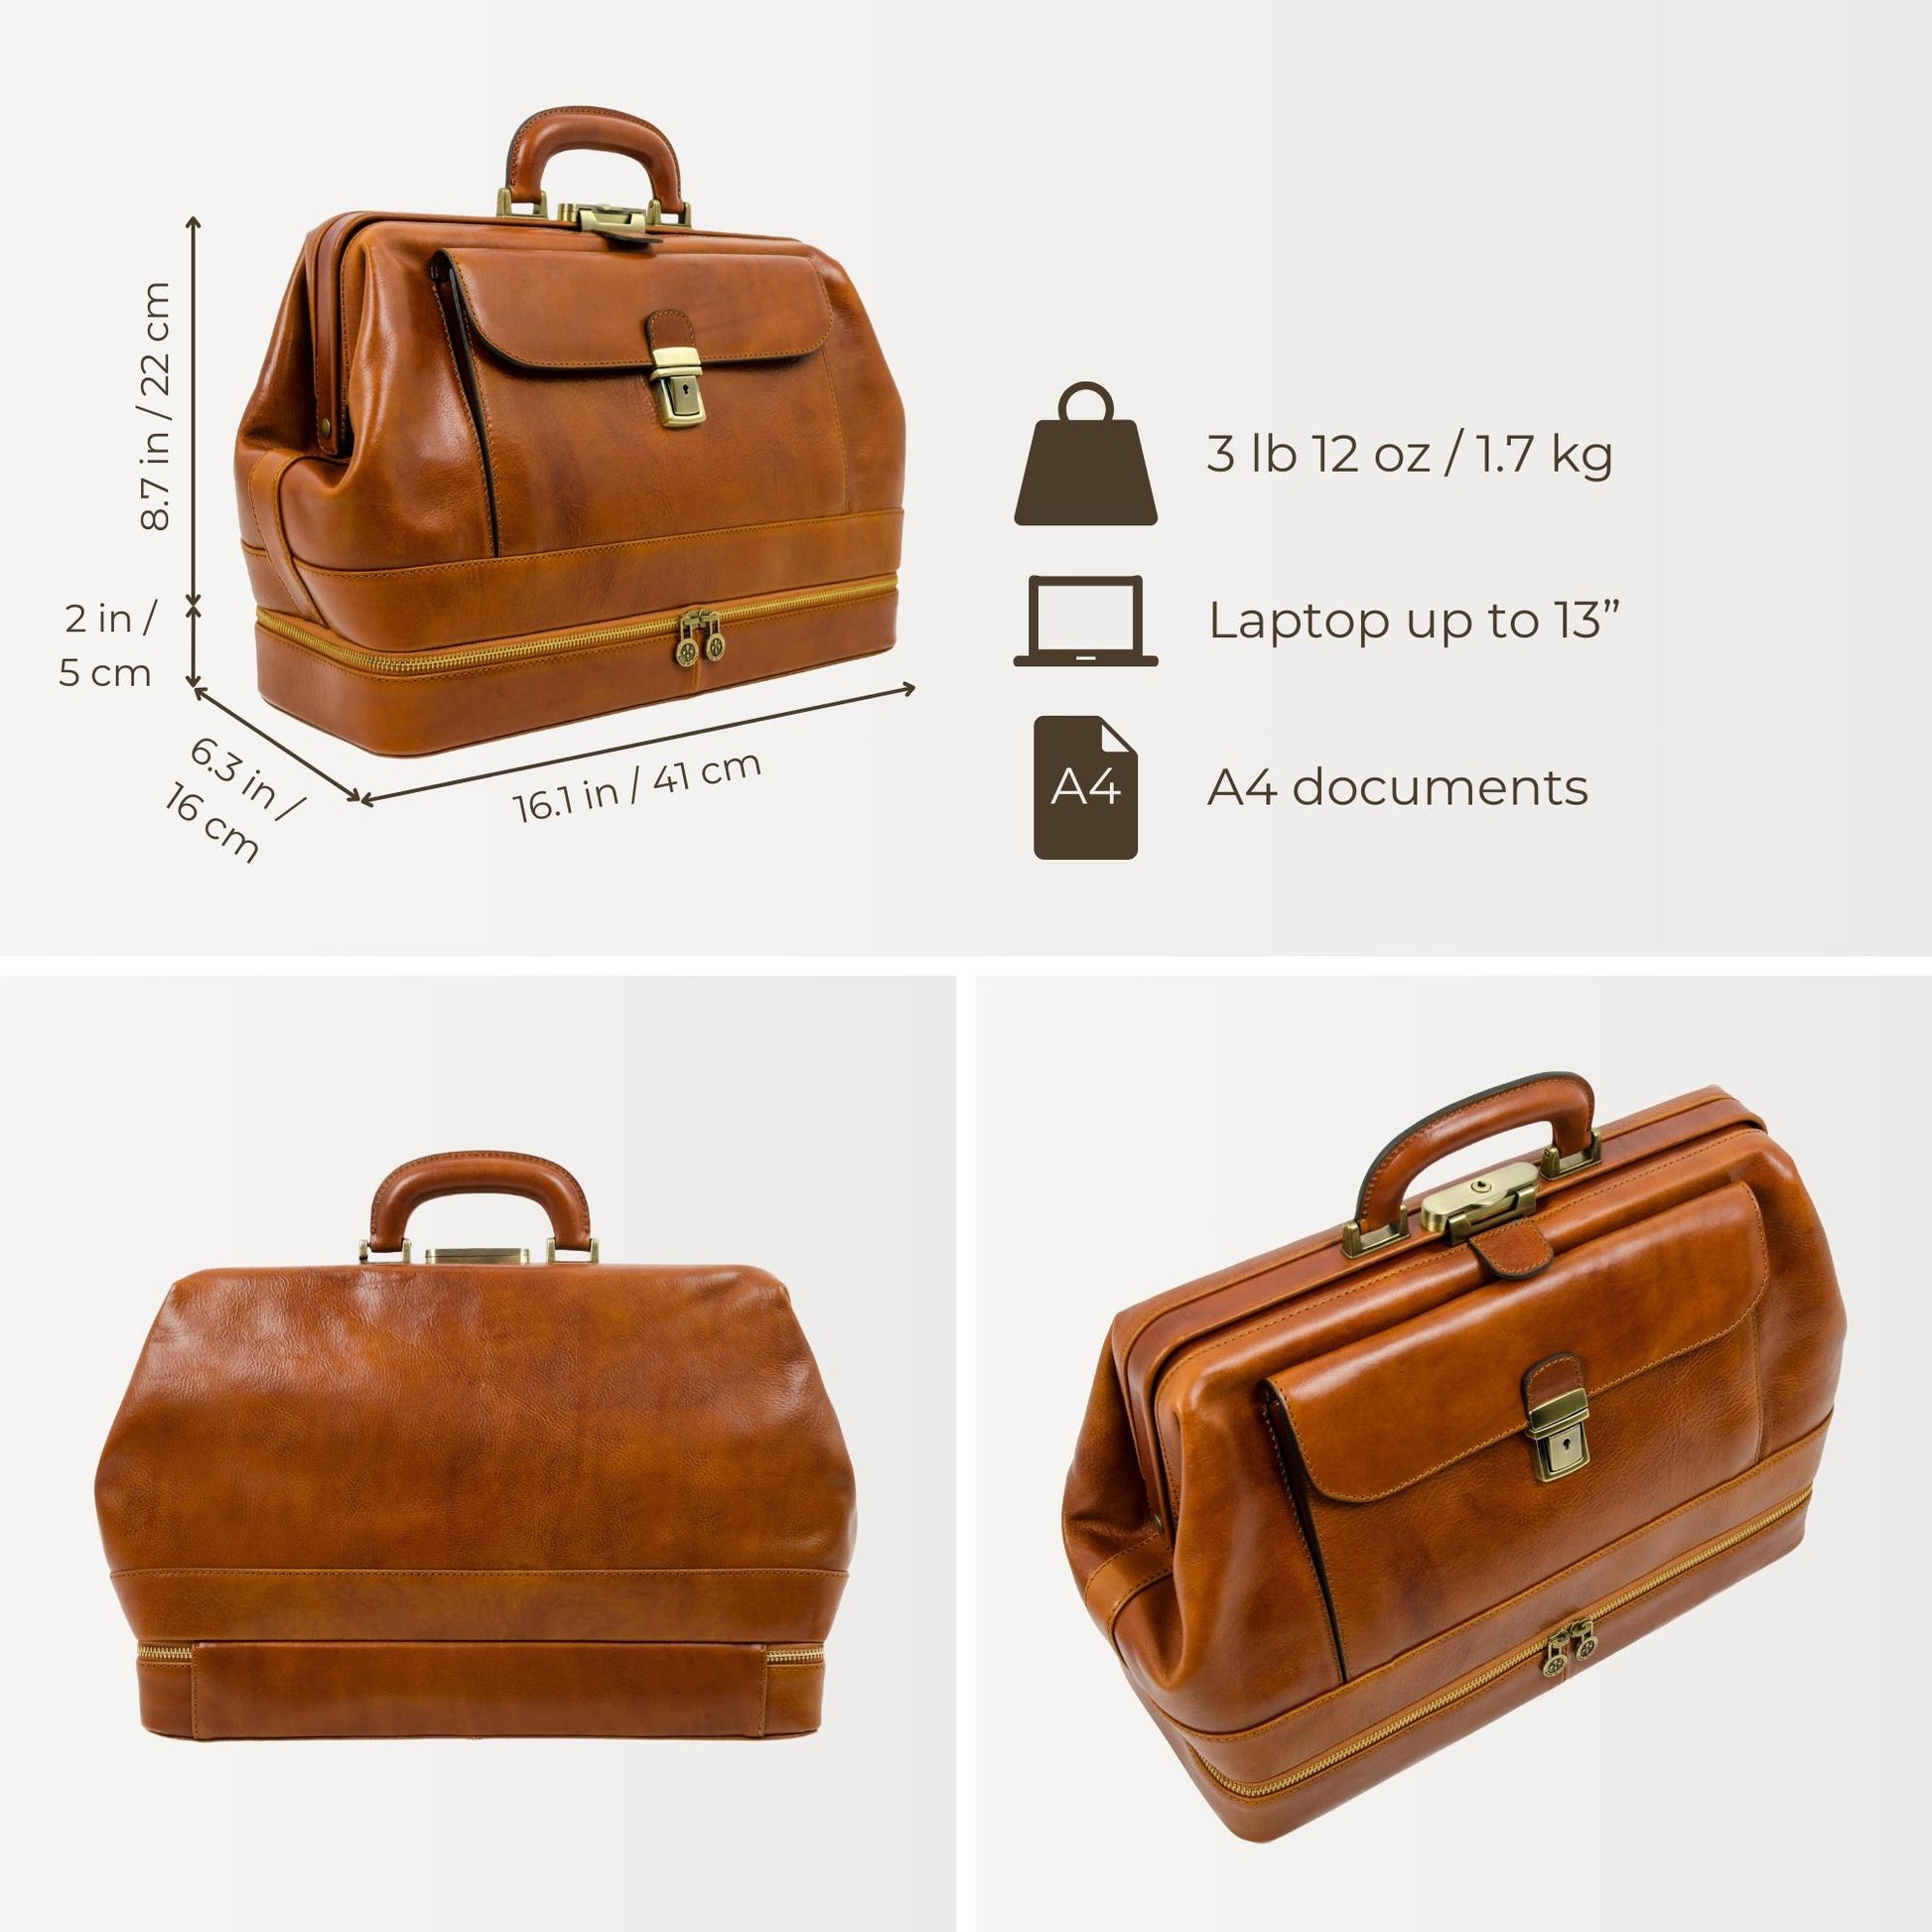 Large Italian Leather Doctor Bag - The Master and Margarita Doctor Bag Time Resistance   